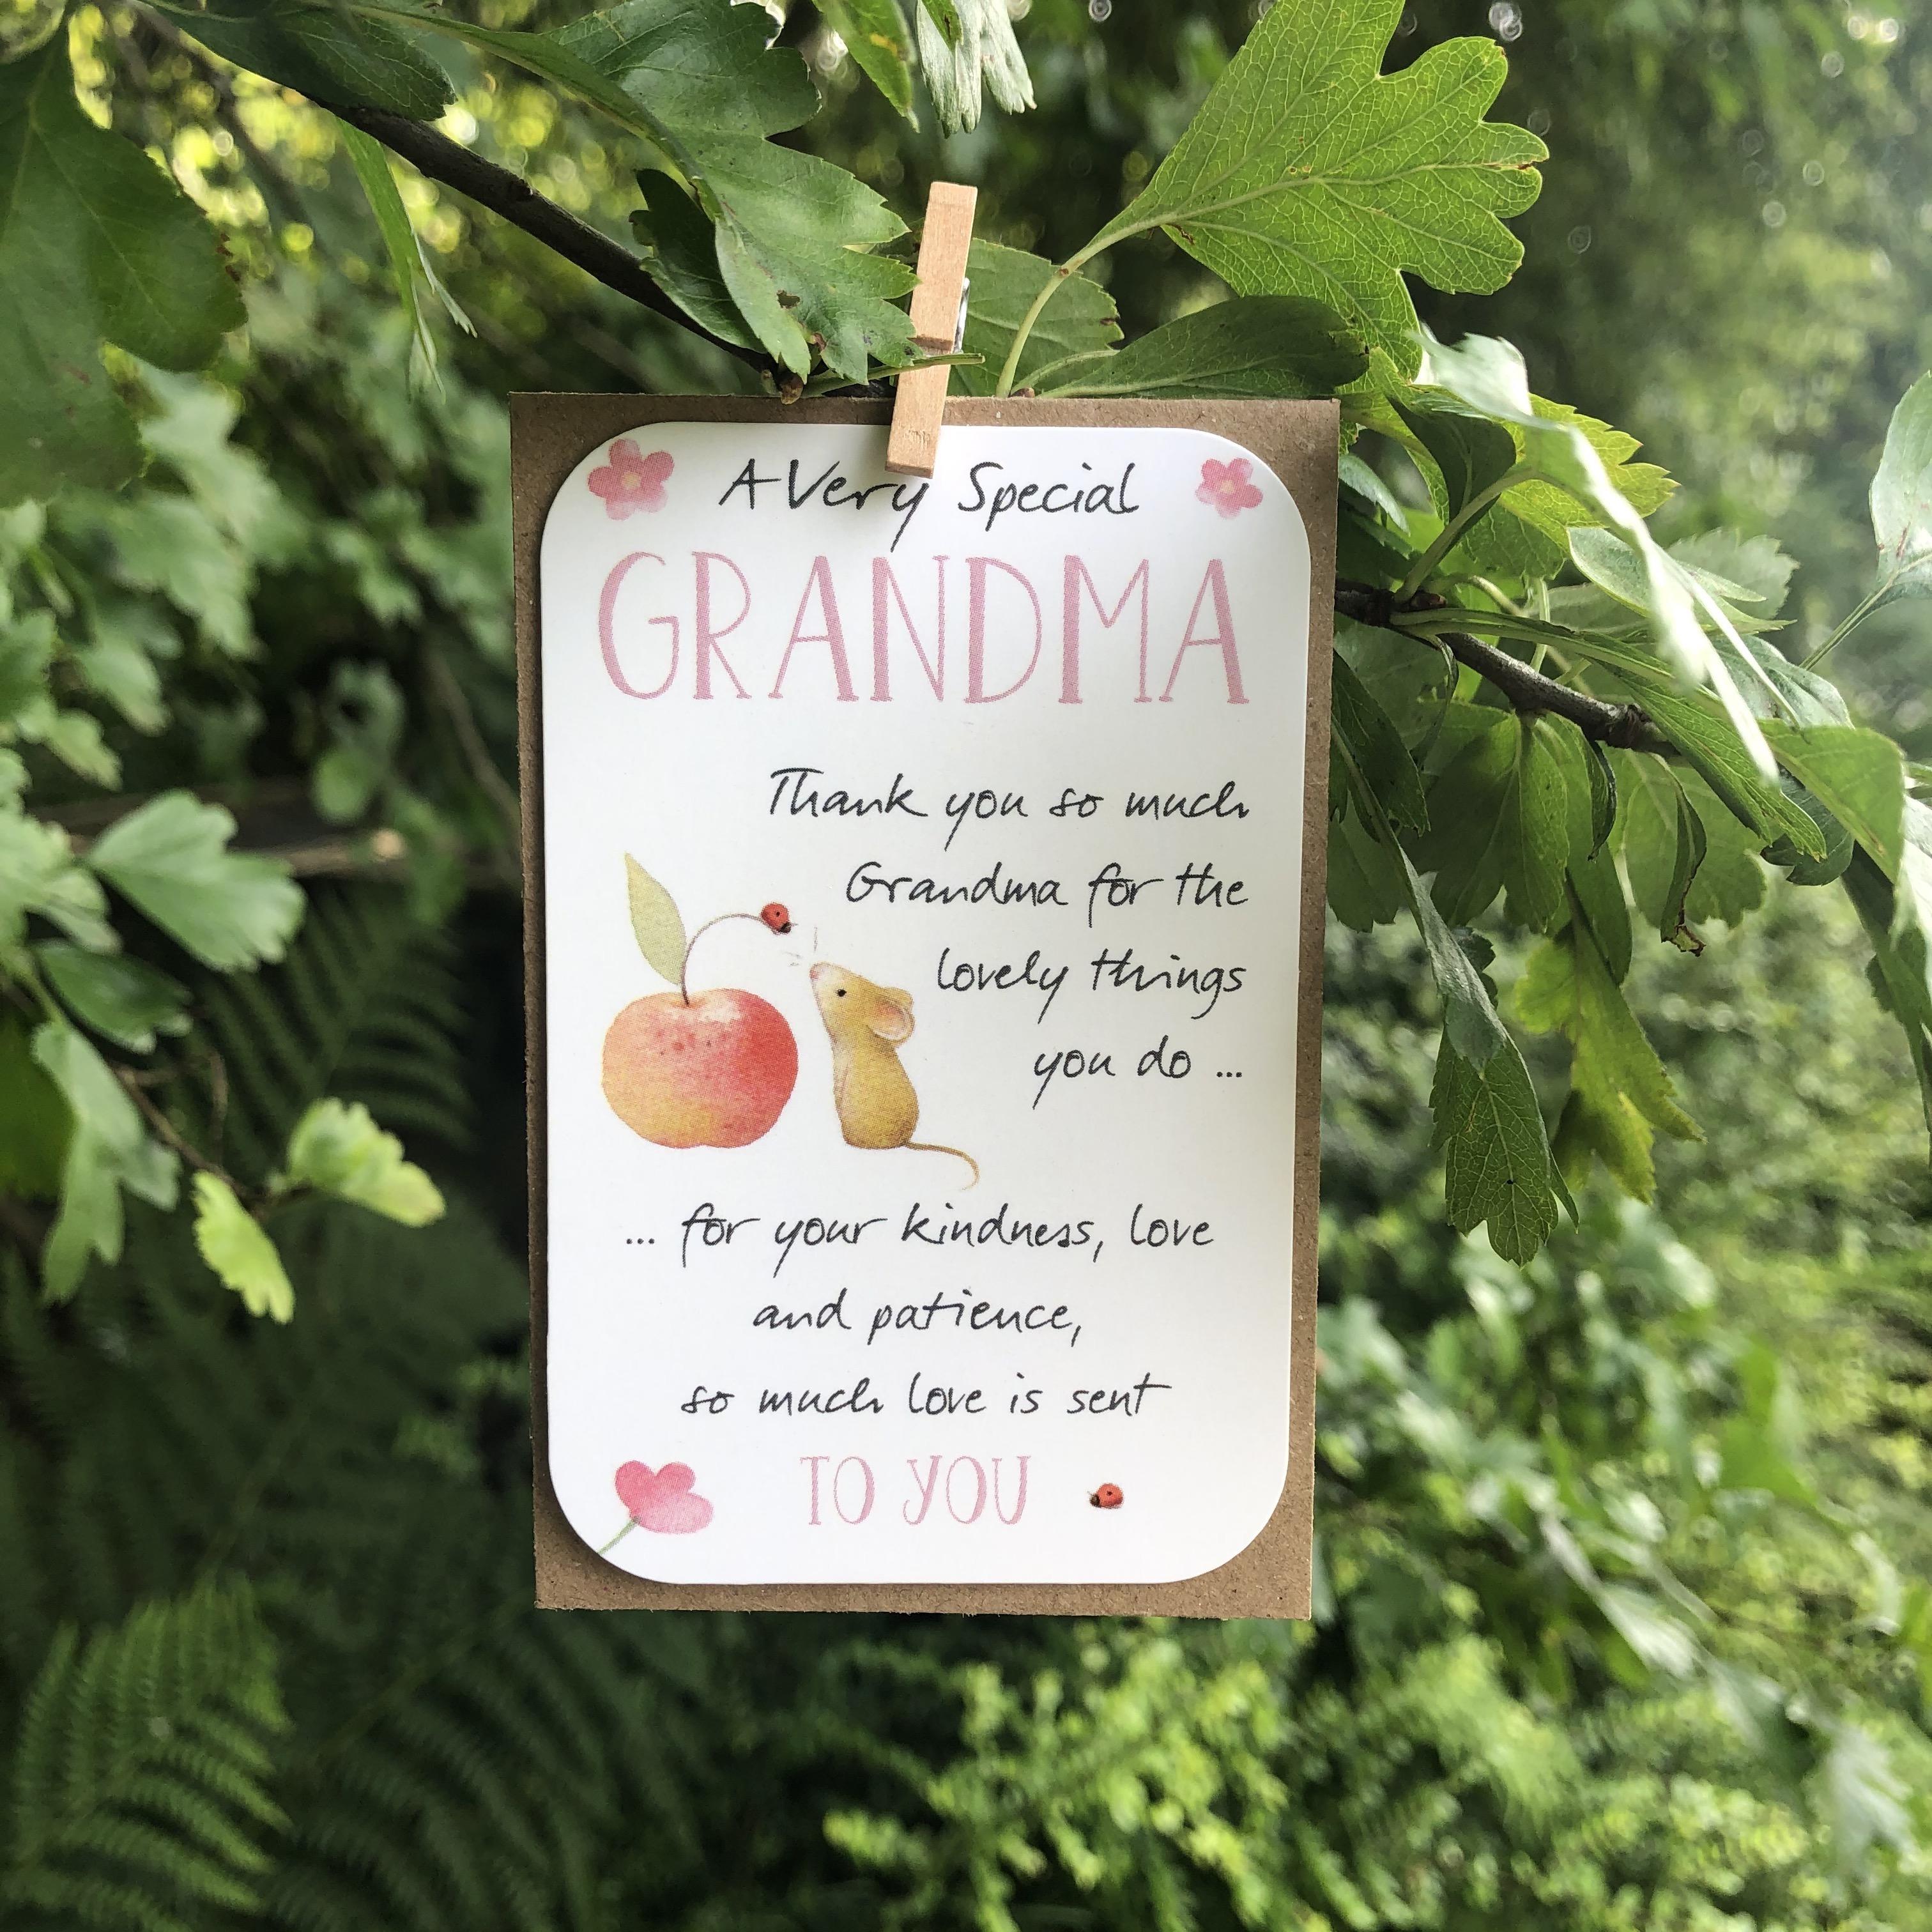 A small keepsake card with a Grandma caption, and lovely little verse